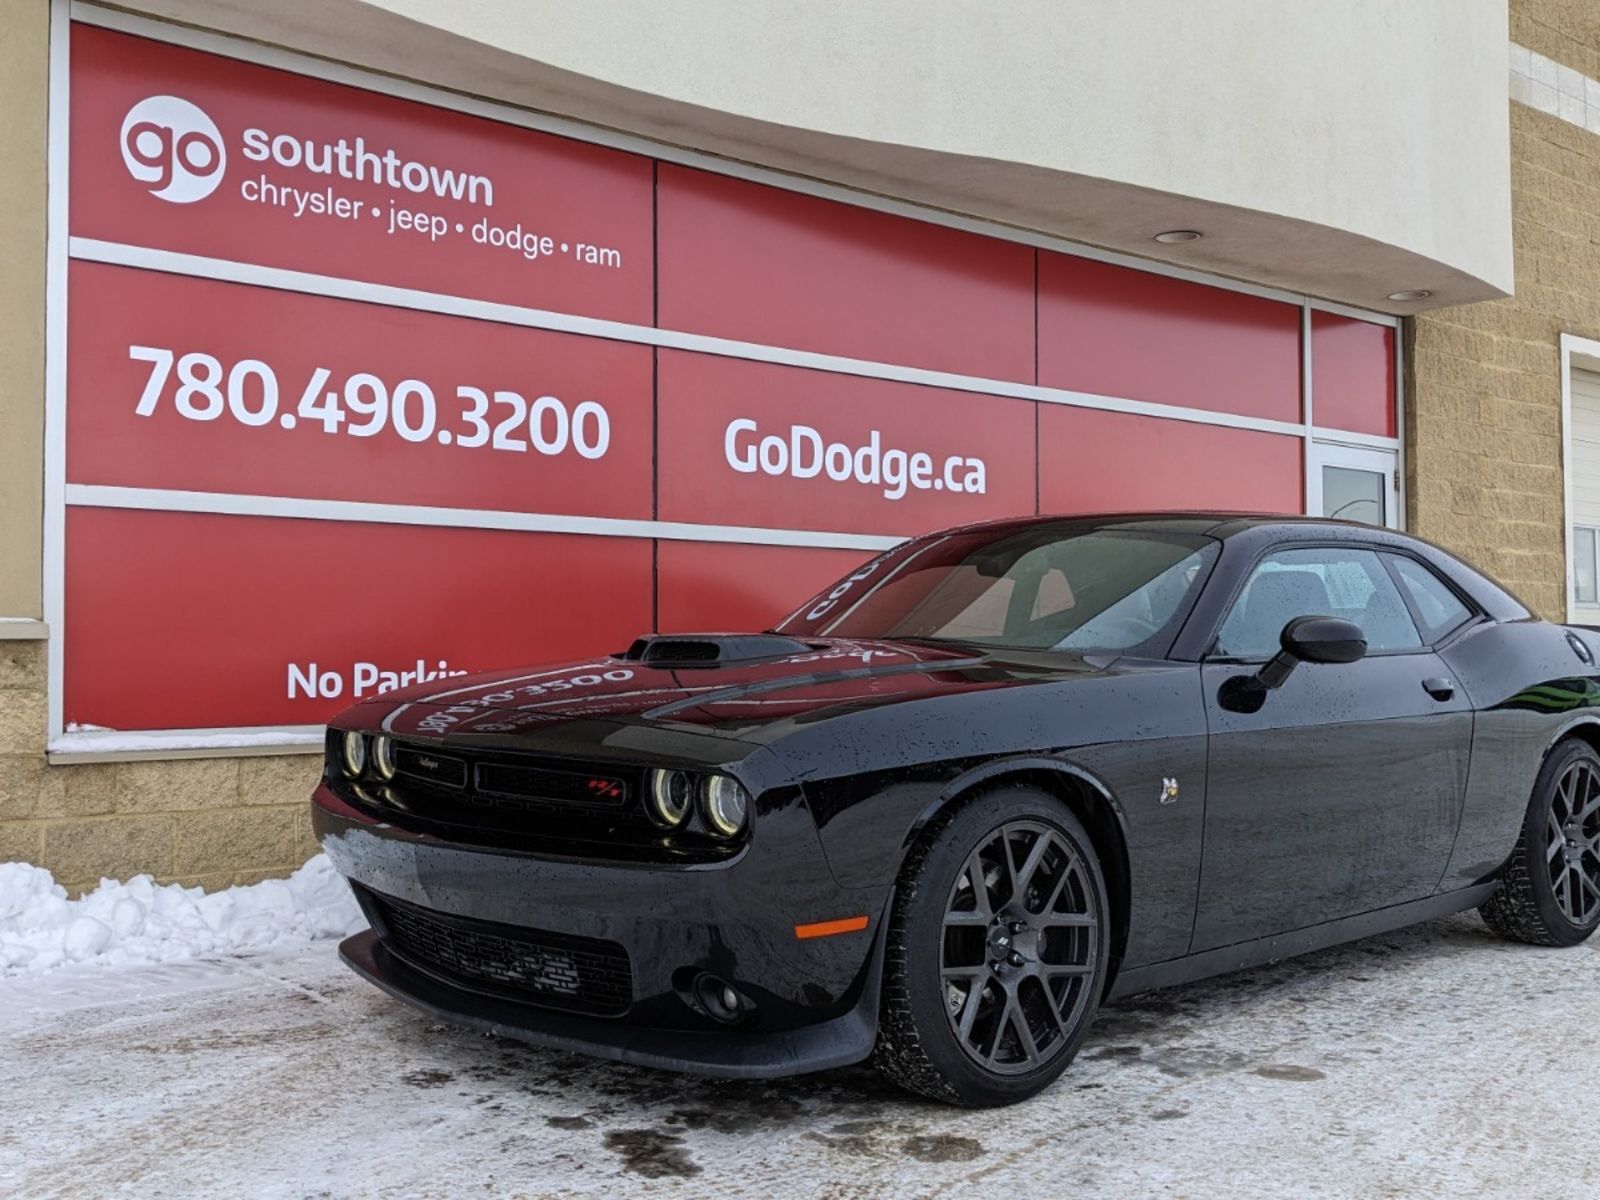 2017 Dodge Challenger SCAT PACK SHAKER IN PITCH BLACK EQUIPPED WITH A 6.